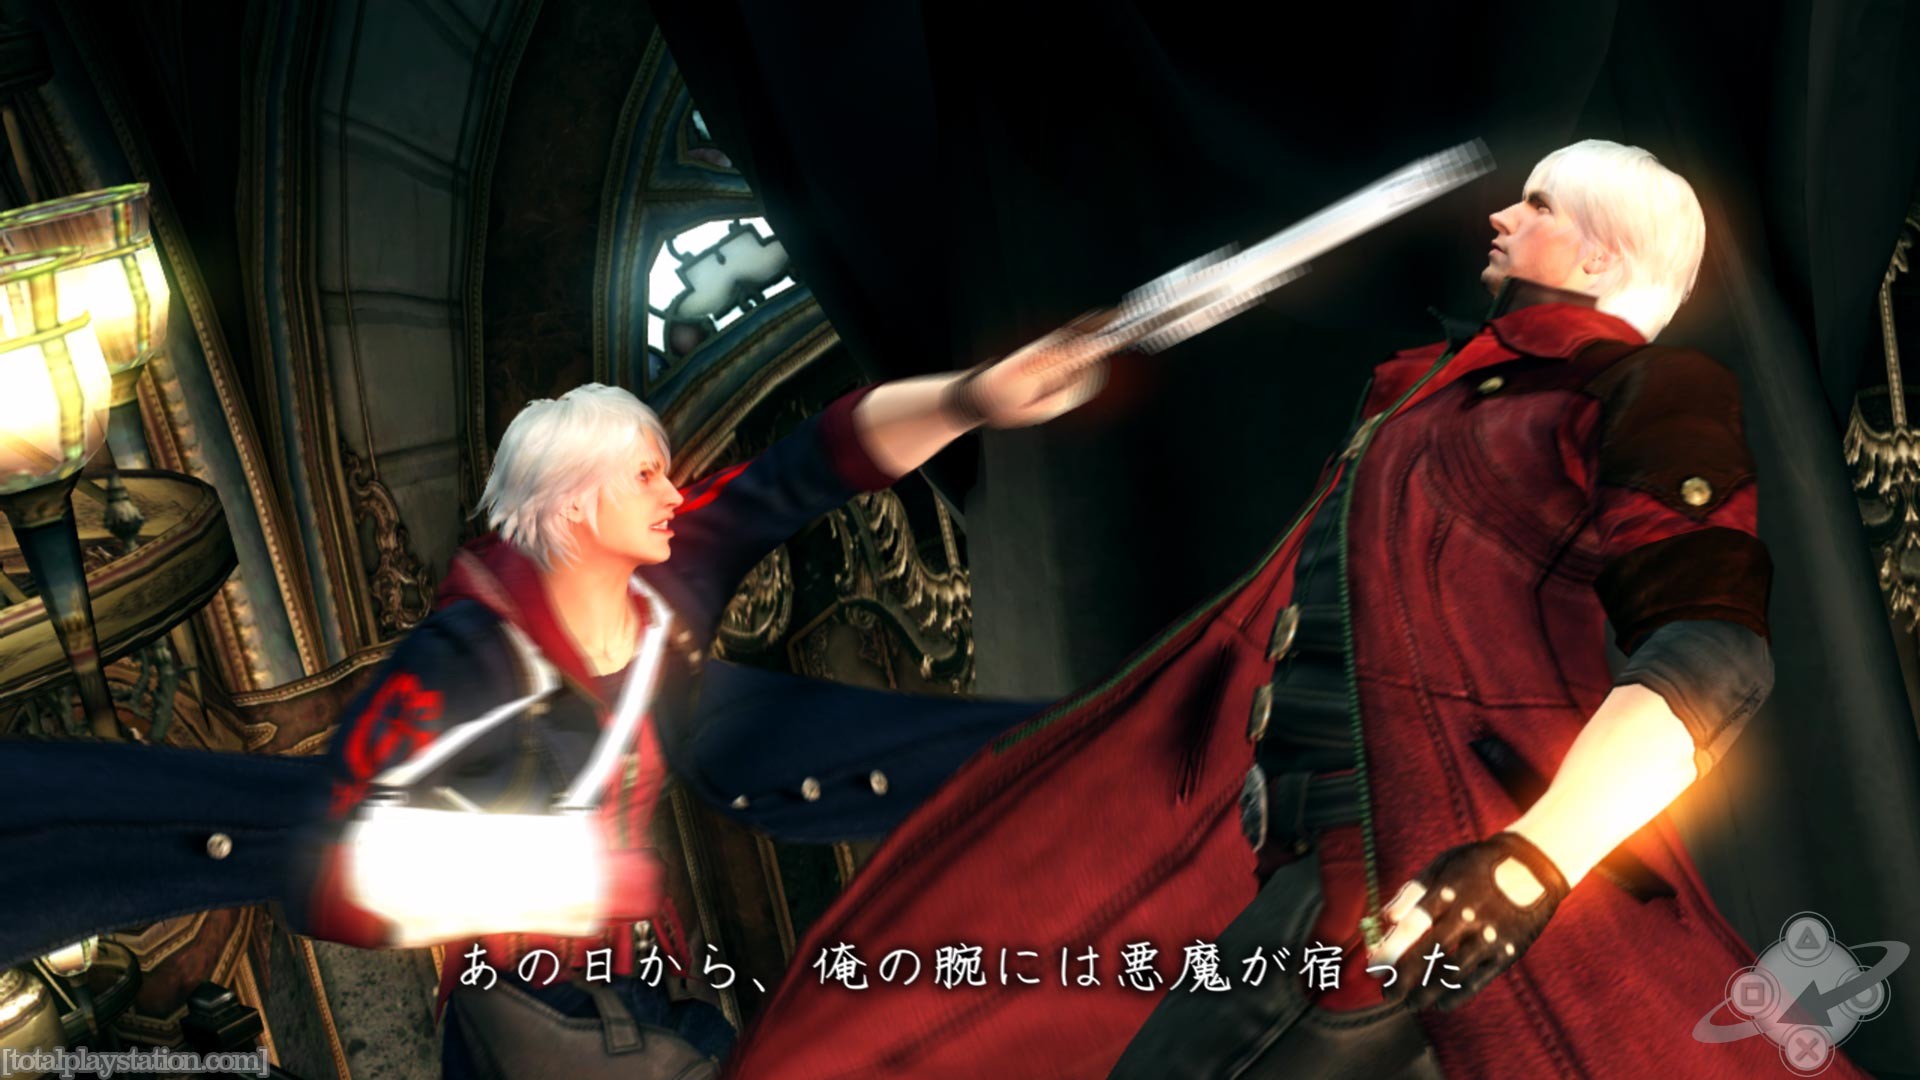 1920x1080 Tags: Anime, Devil May Cry, Dante (Devil May Cry), Nero